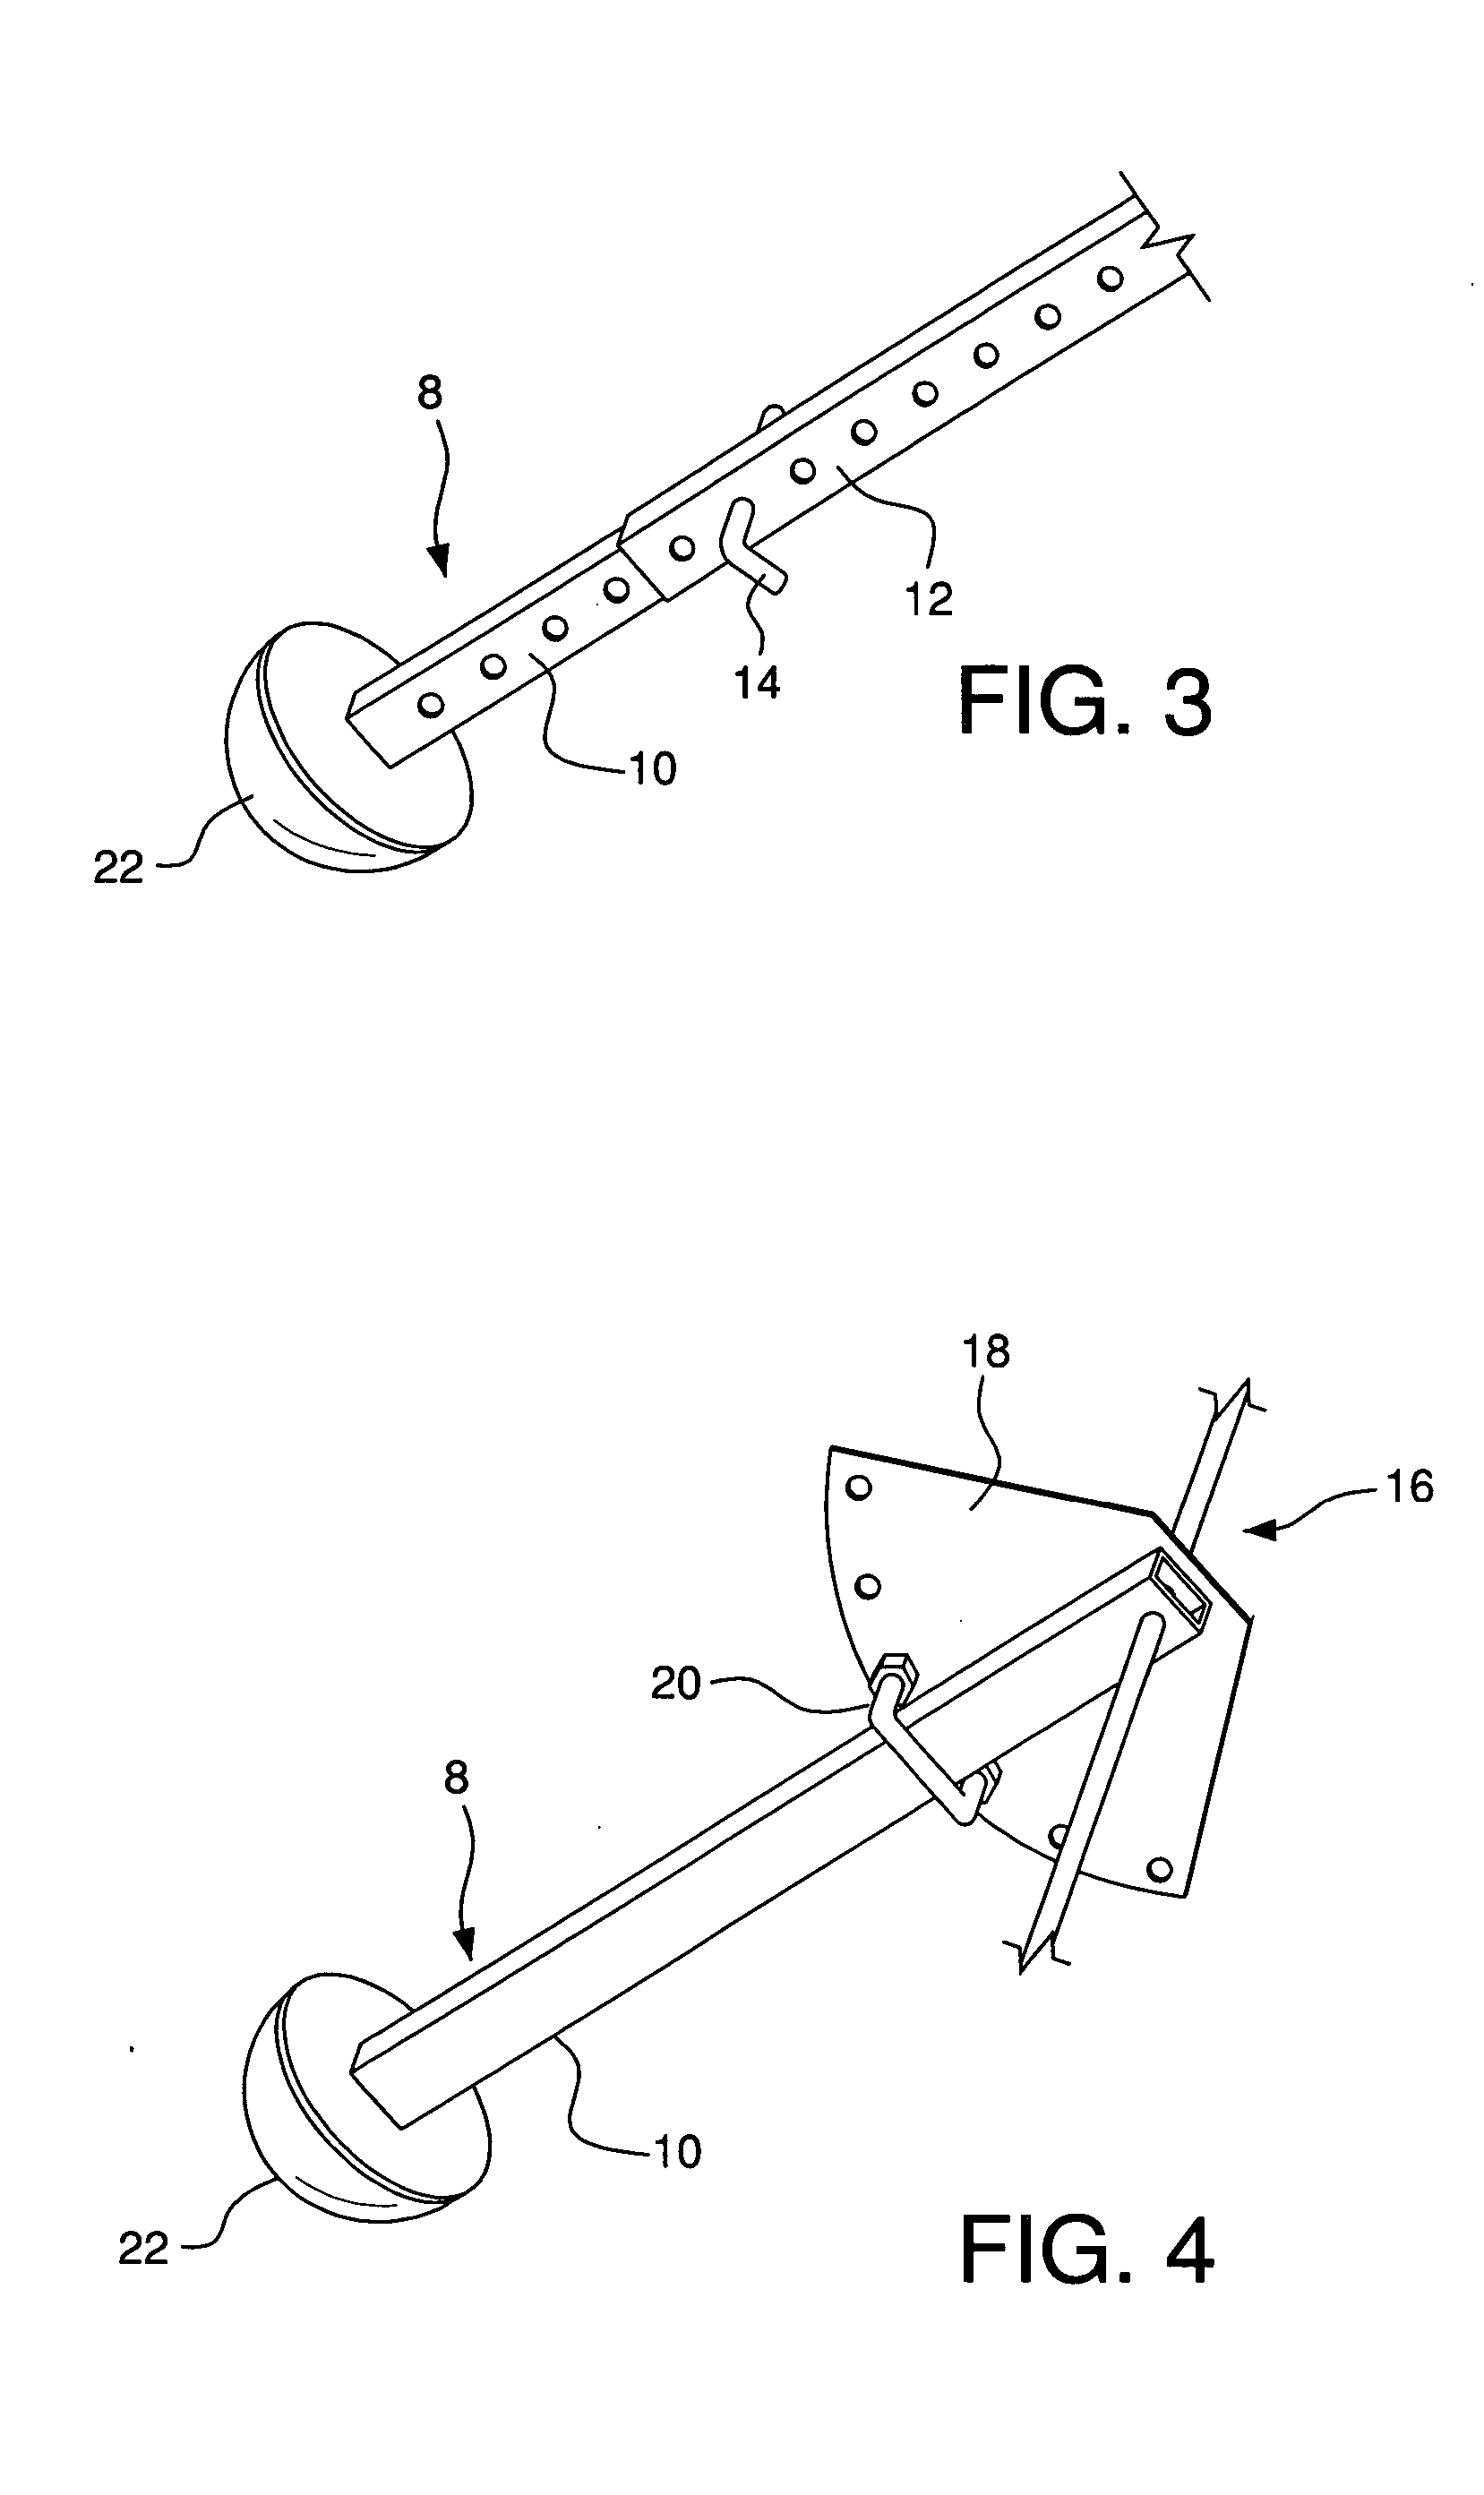 Apparatus and method for stabilizing a motorcycle during turning maneuvers